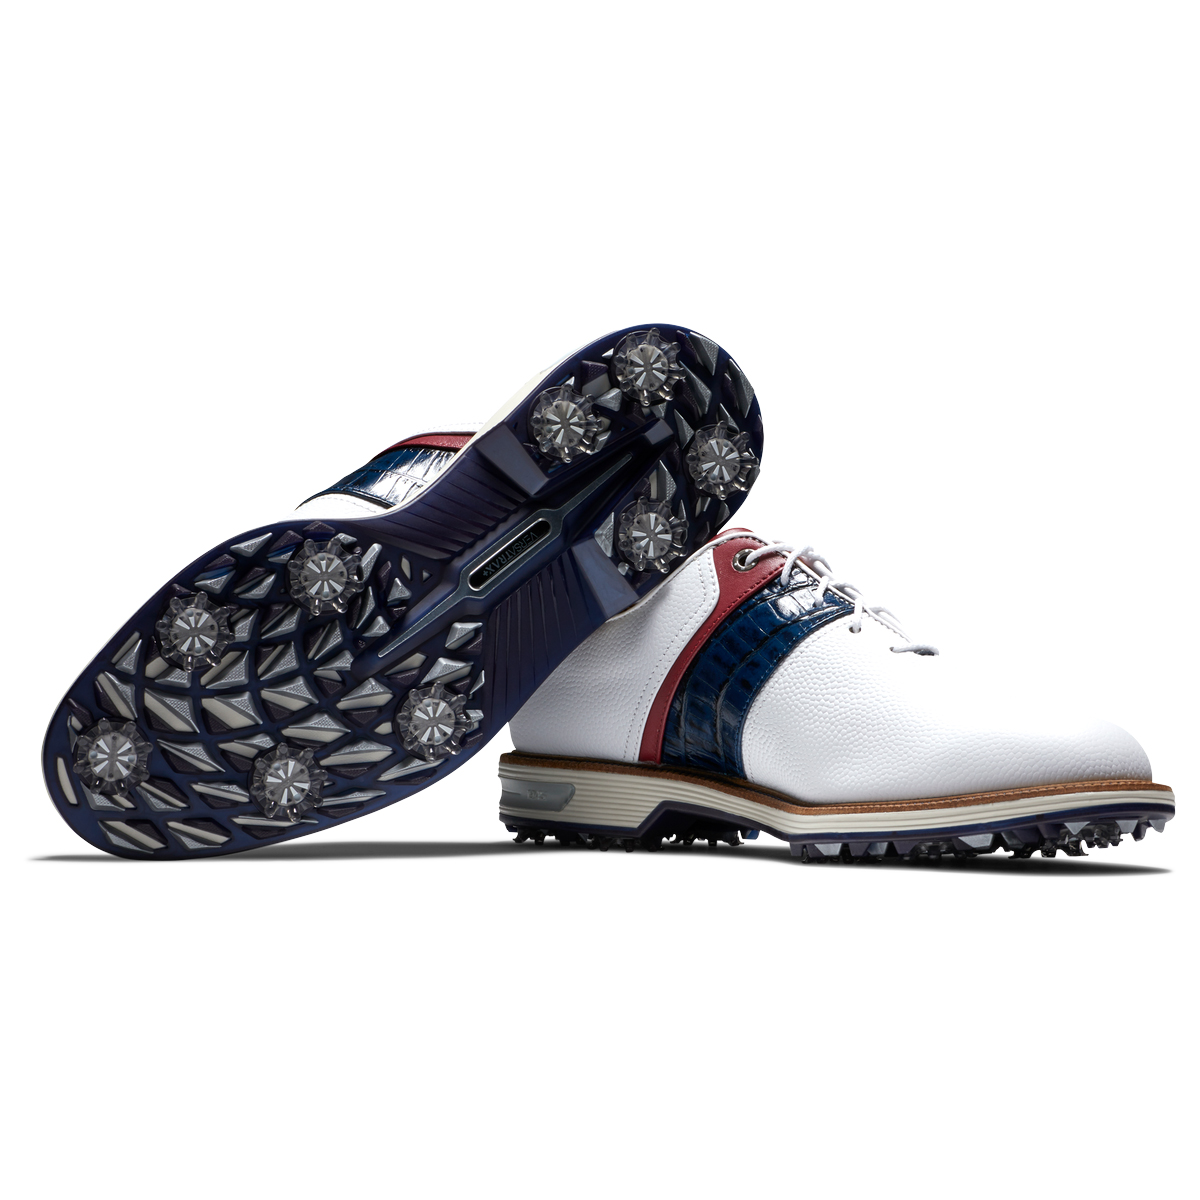 FootJoy DryJoys Premiere Series Packard Mens Golf Shoes  - White/Navy/Red